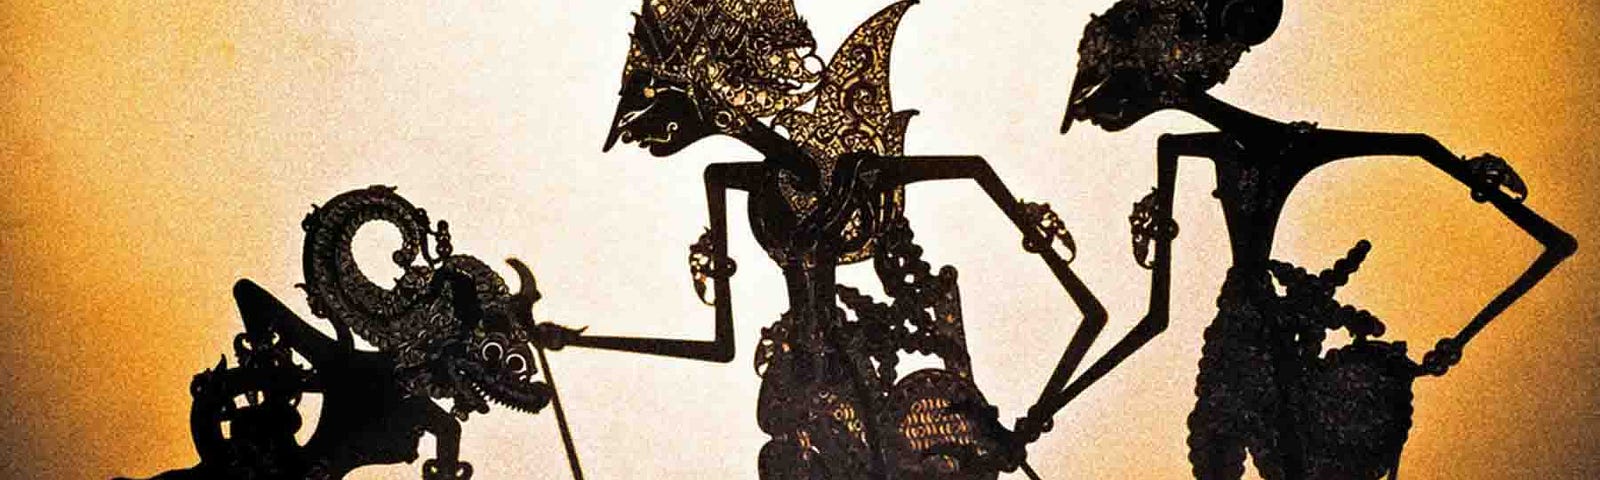 Latest Stories And News About Wayang Kulit Indonesia Medium